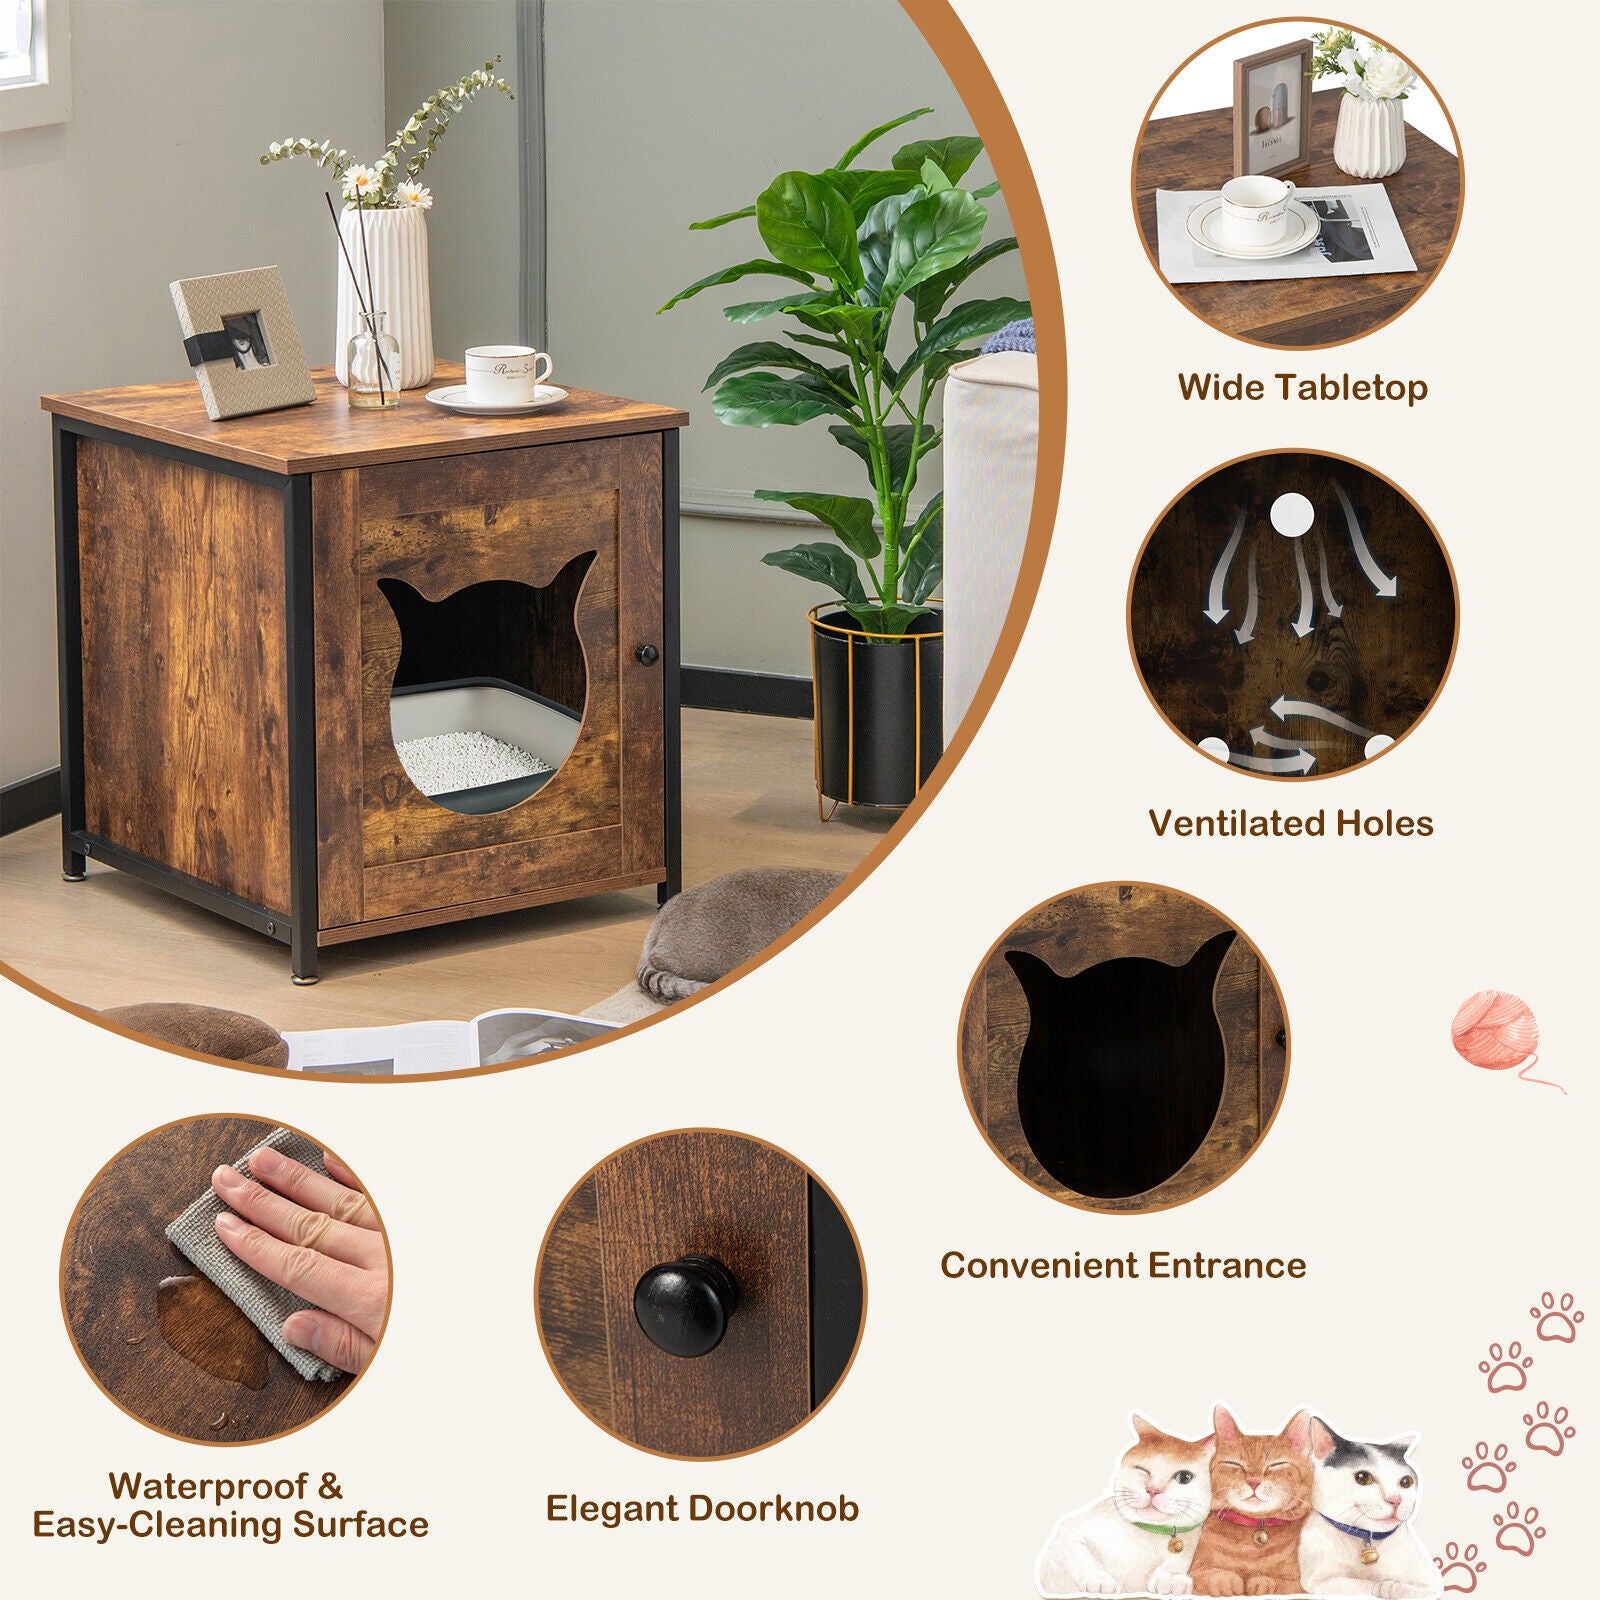 Cat Litter Box Enclosure with Metal Frame & Adjustable Feet